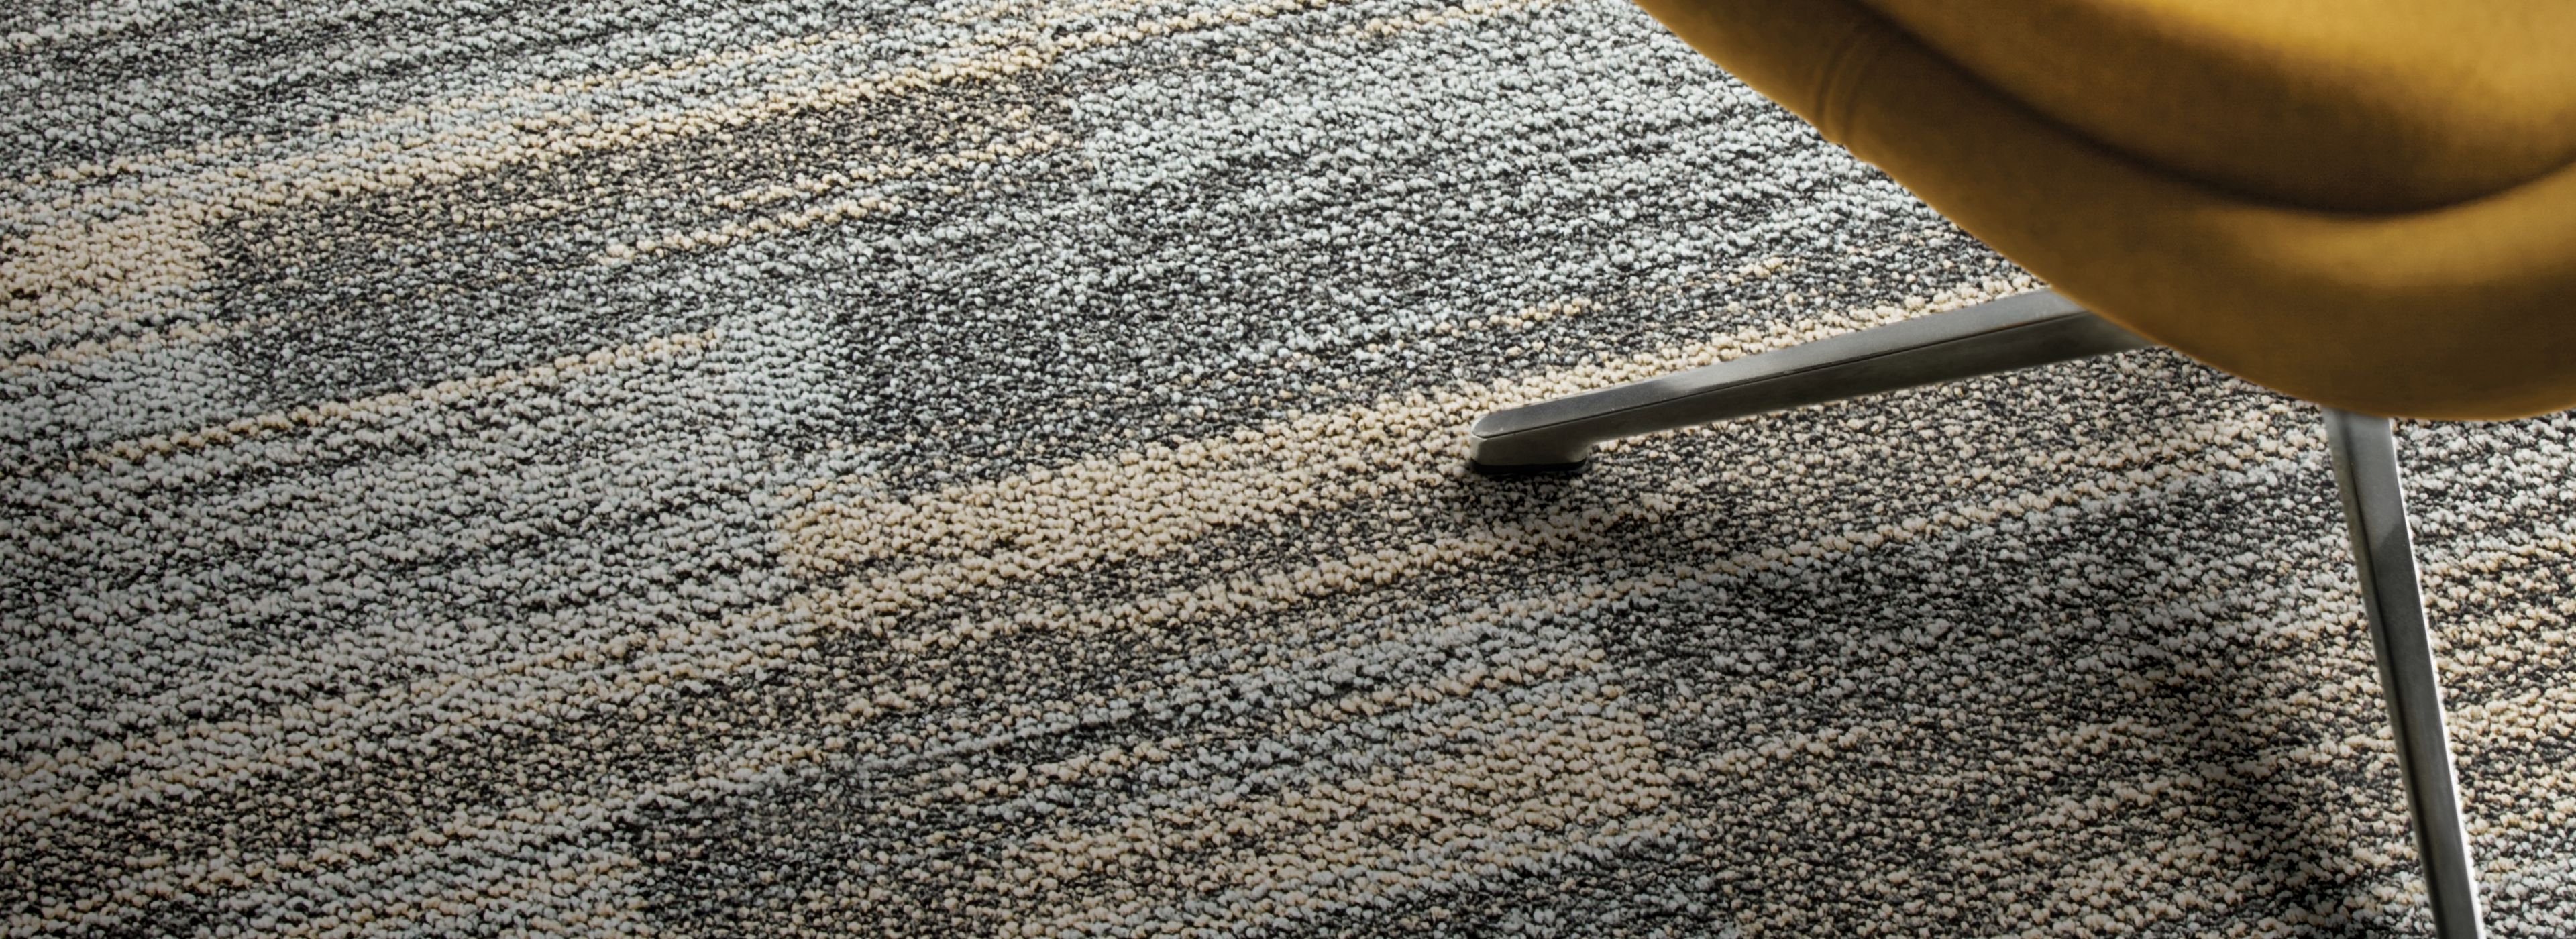 Close-up of Interface AE313 plank carpet tile with yellow chair imagen número 1